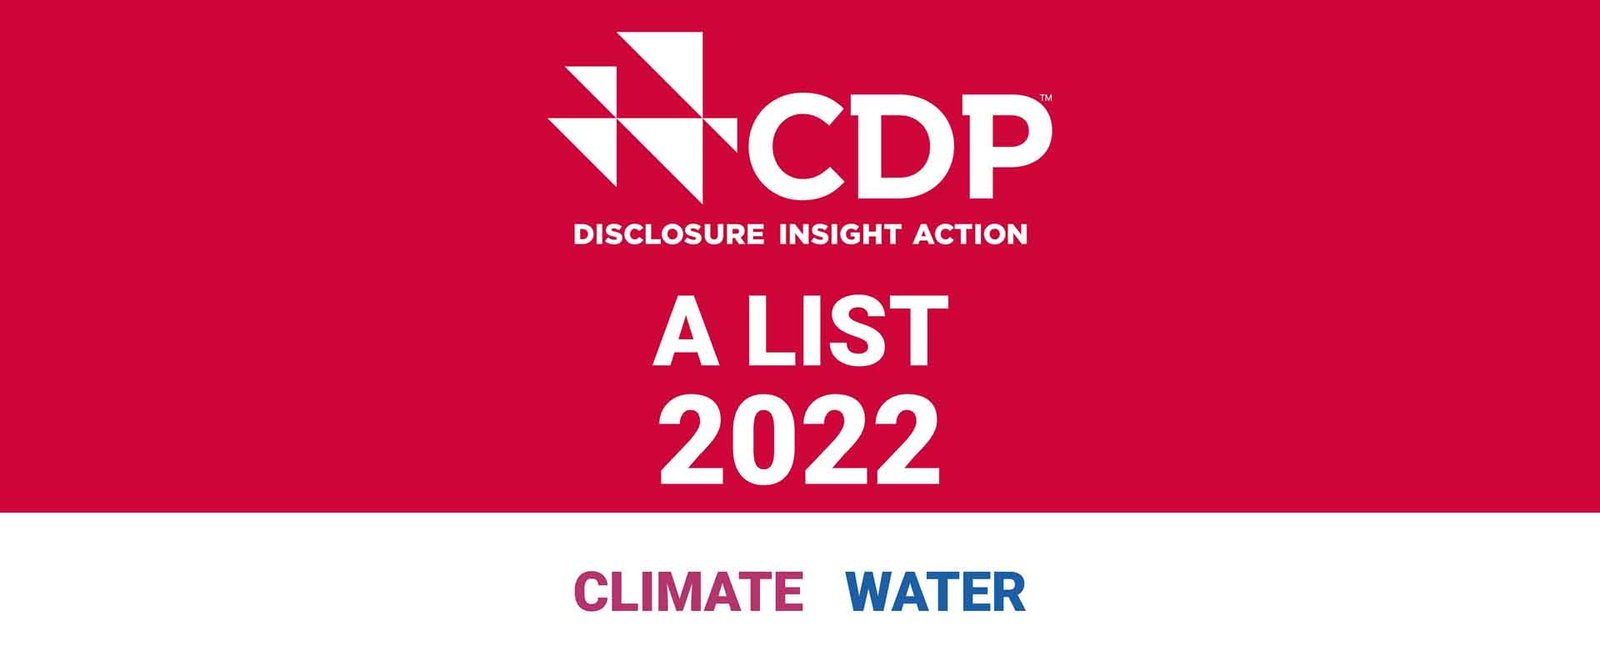 Schaeffler Group Awarded By Cdp In The Fields Of Climate Change And Water Security (2)